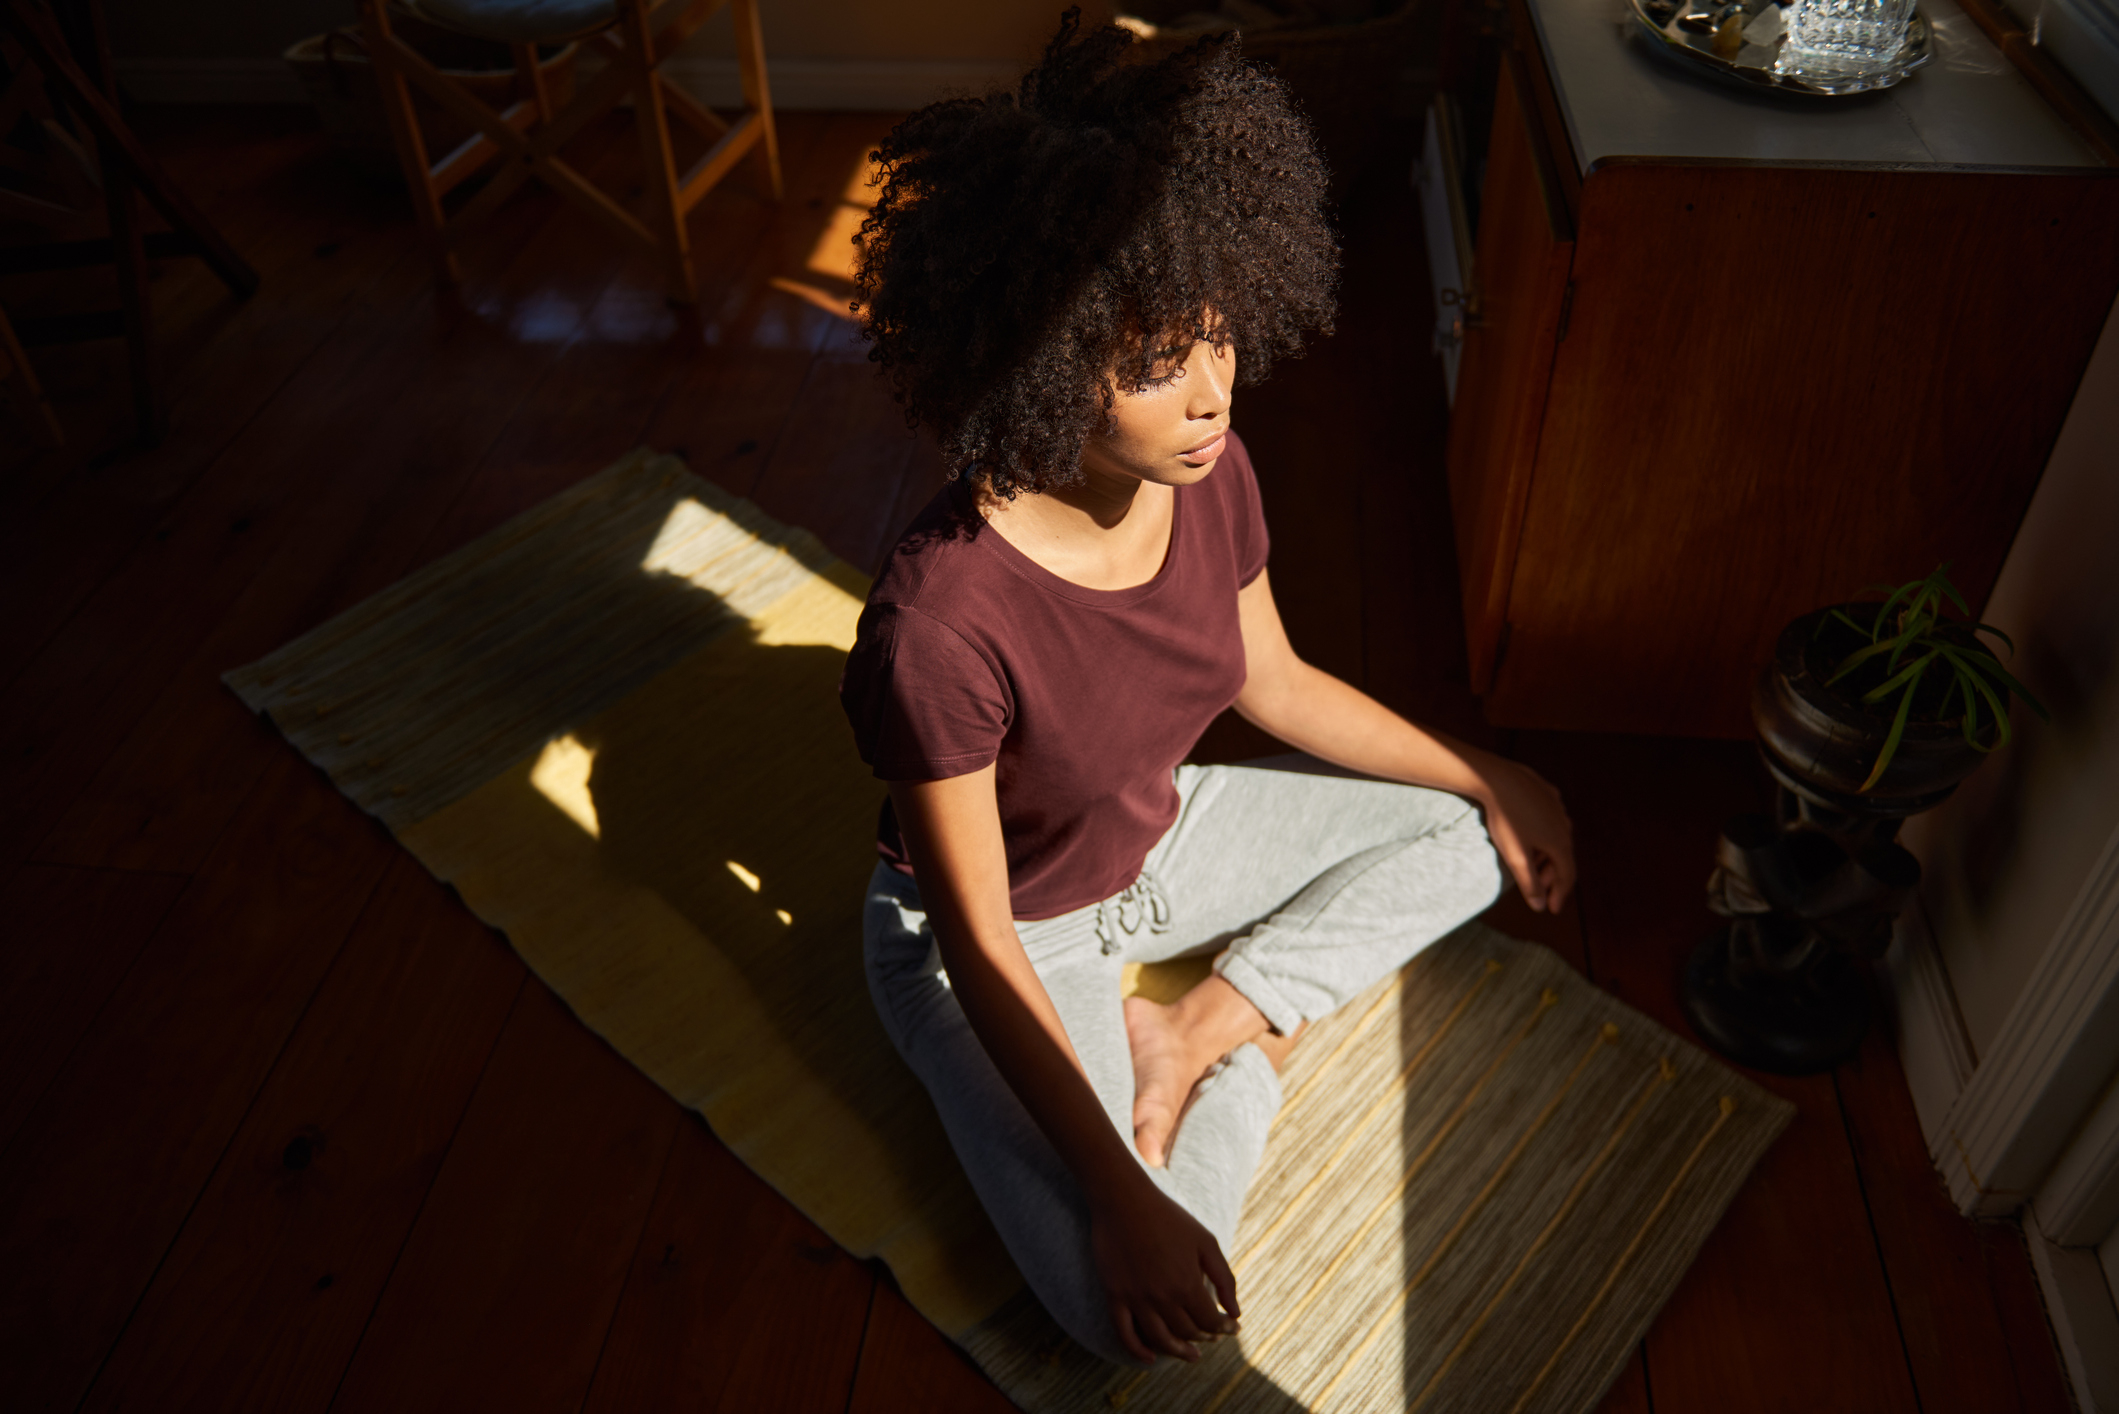 A person with curly hair sits cross-legged on a yoga mat in a peaceful indoor setting, engaging in a meditative practice